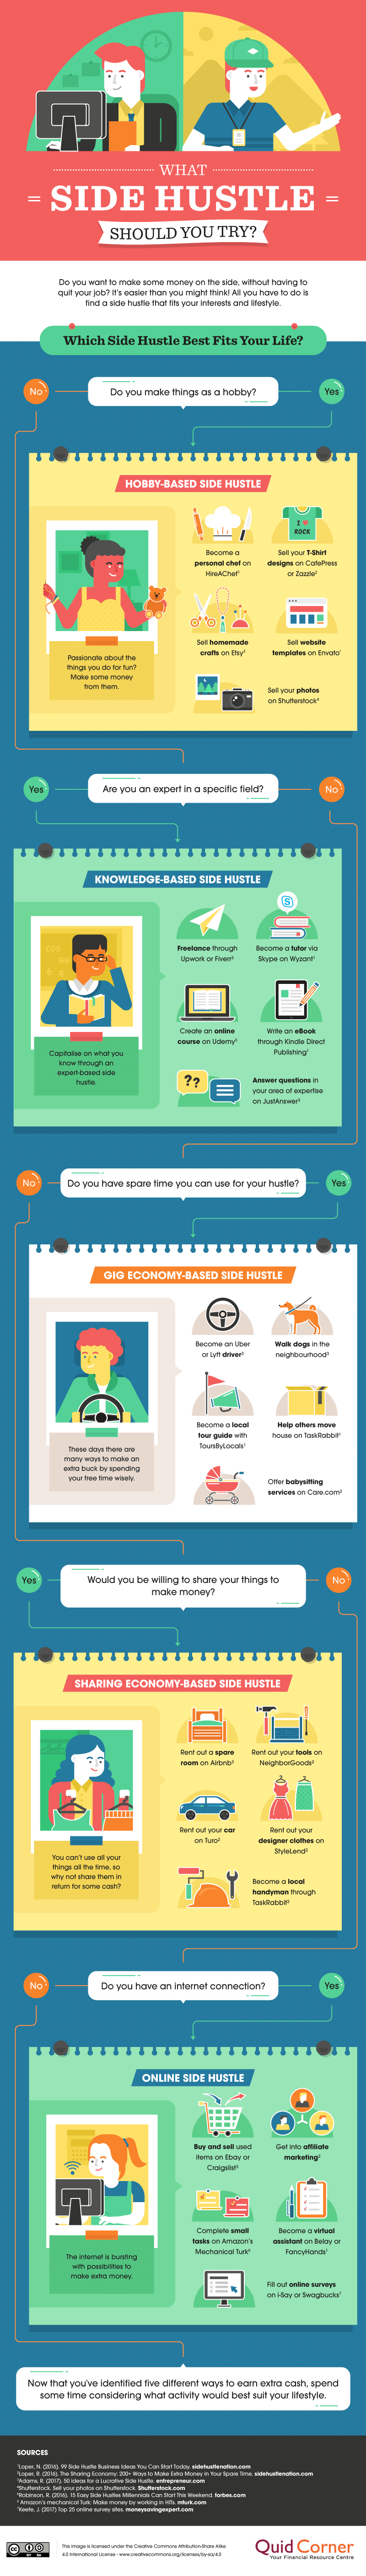 What ‘Side Hustle’ Should You Try? Infographic